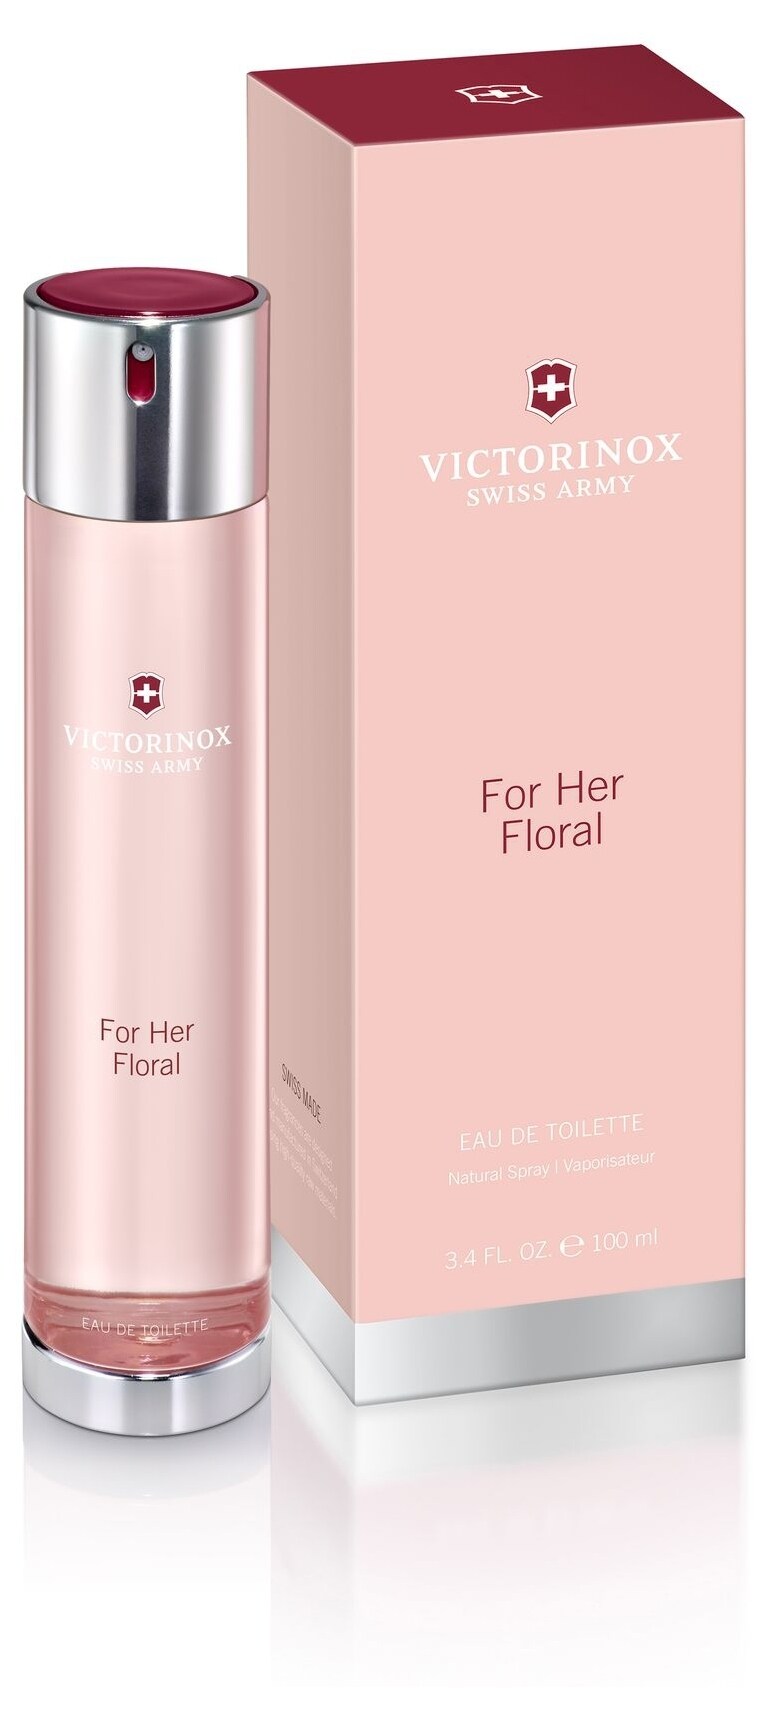 Swiss Army for Her Floral by Victorinox » Reviews & Perfume Facts